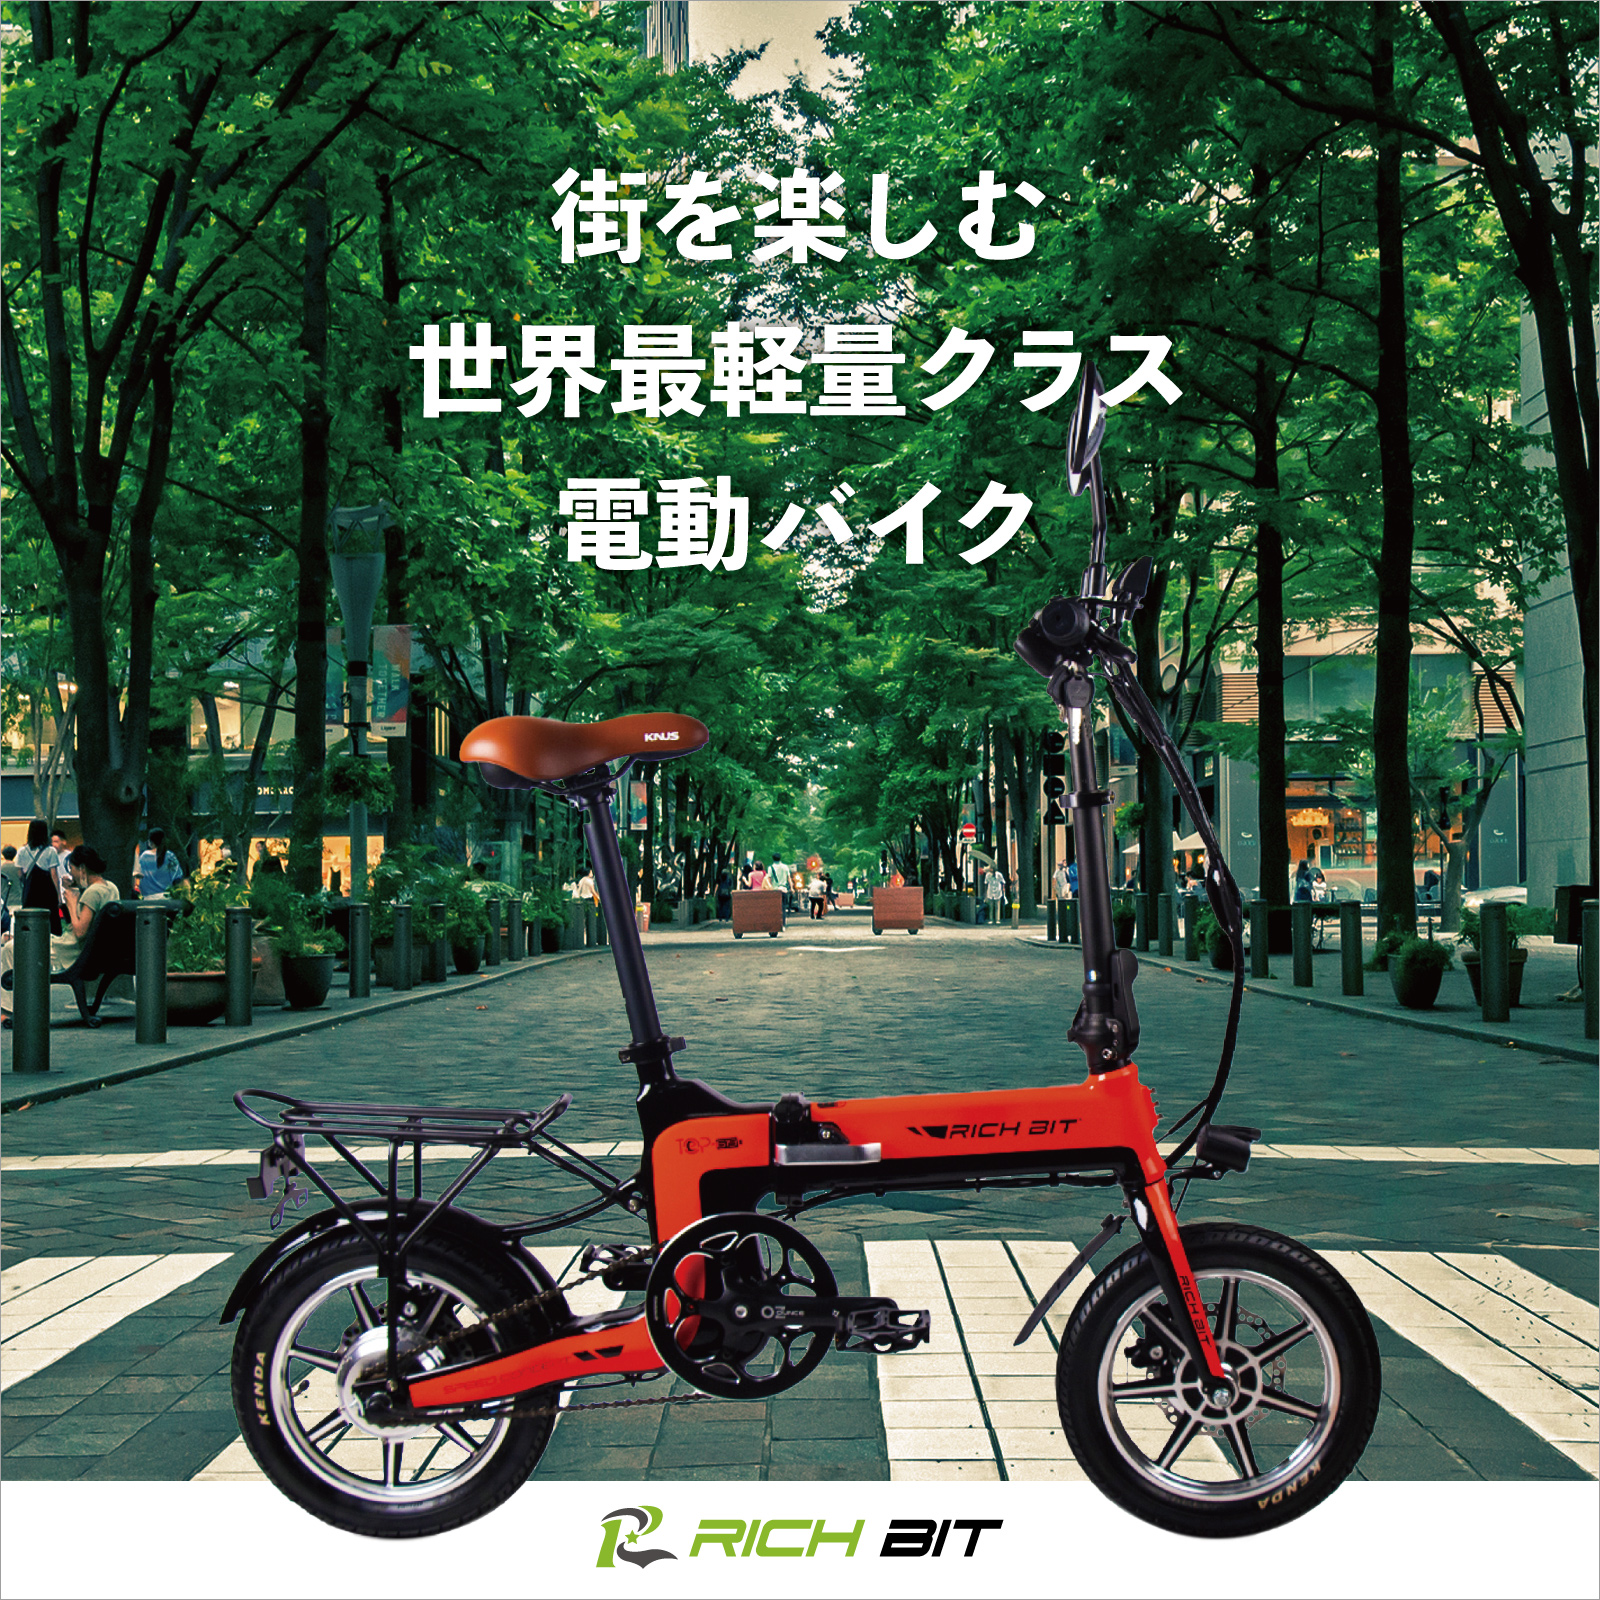  electric bike pedal attaching RICH BIT TOP619 motor-bike one kind 50cc Class possible to run in the public road folding small size full electric number acquisition possibility 